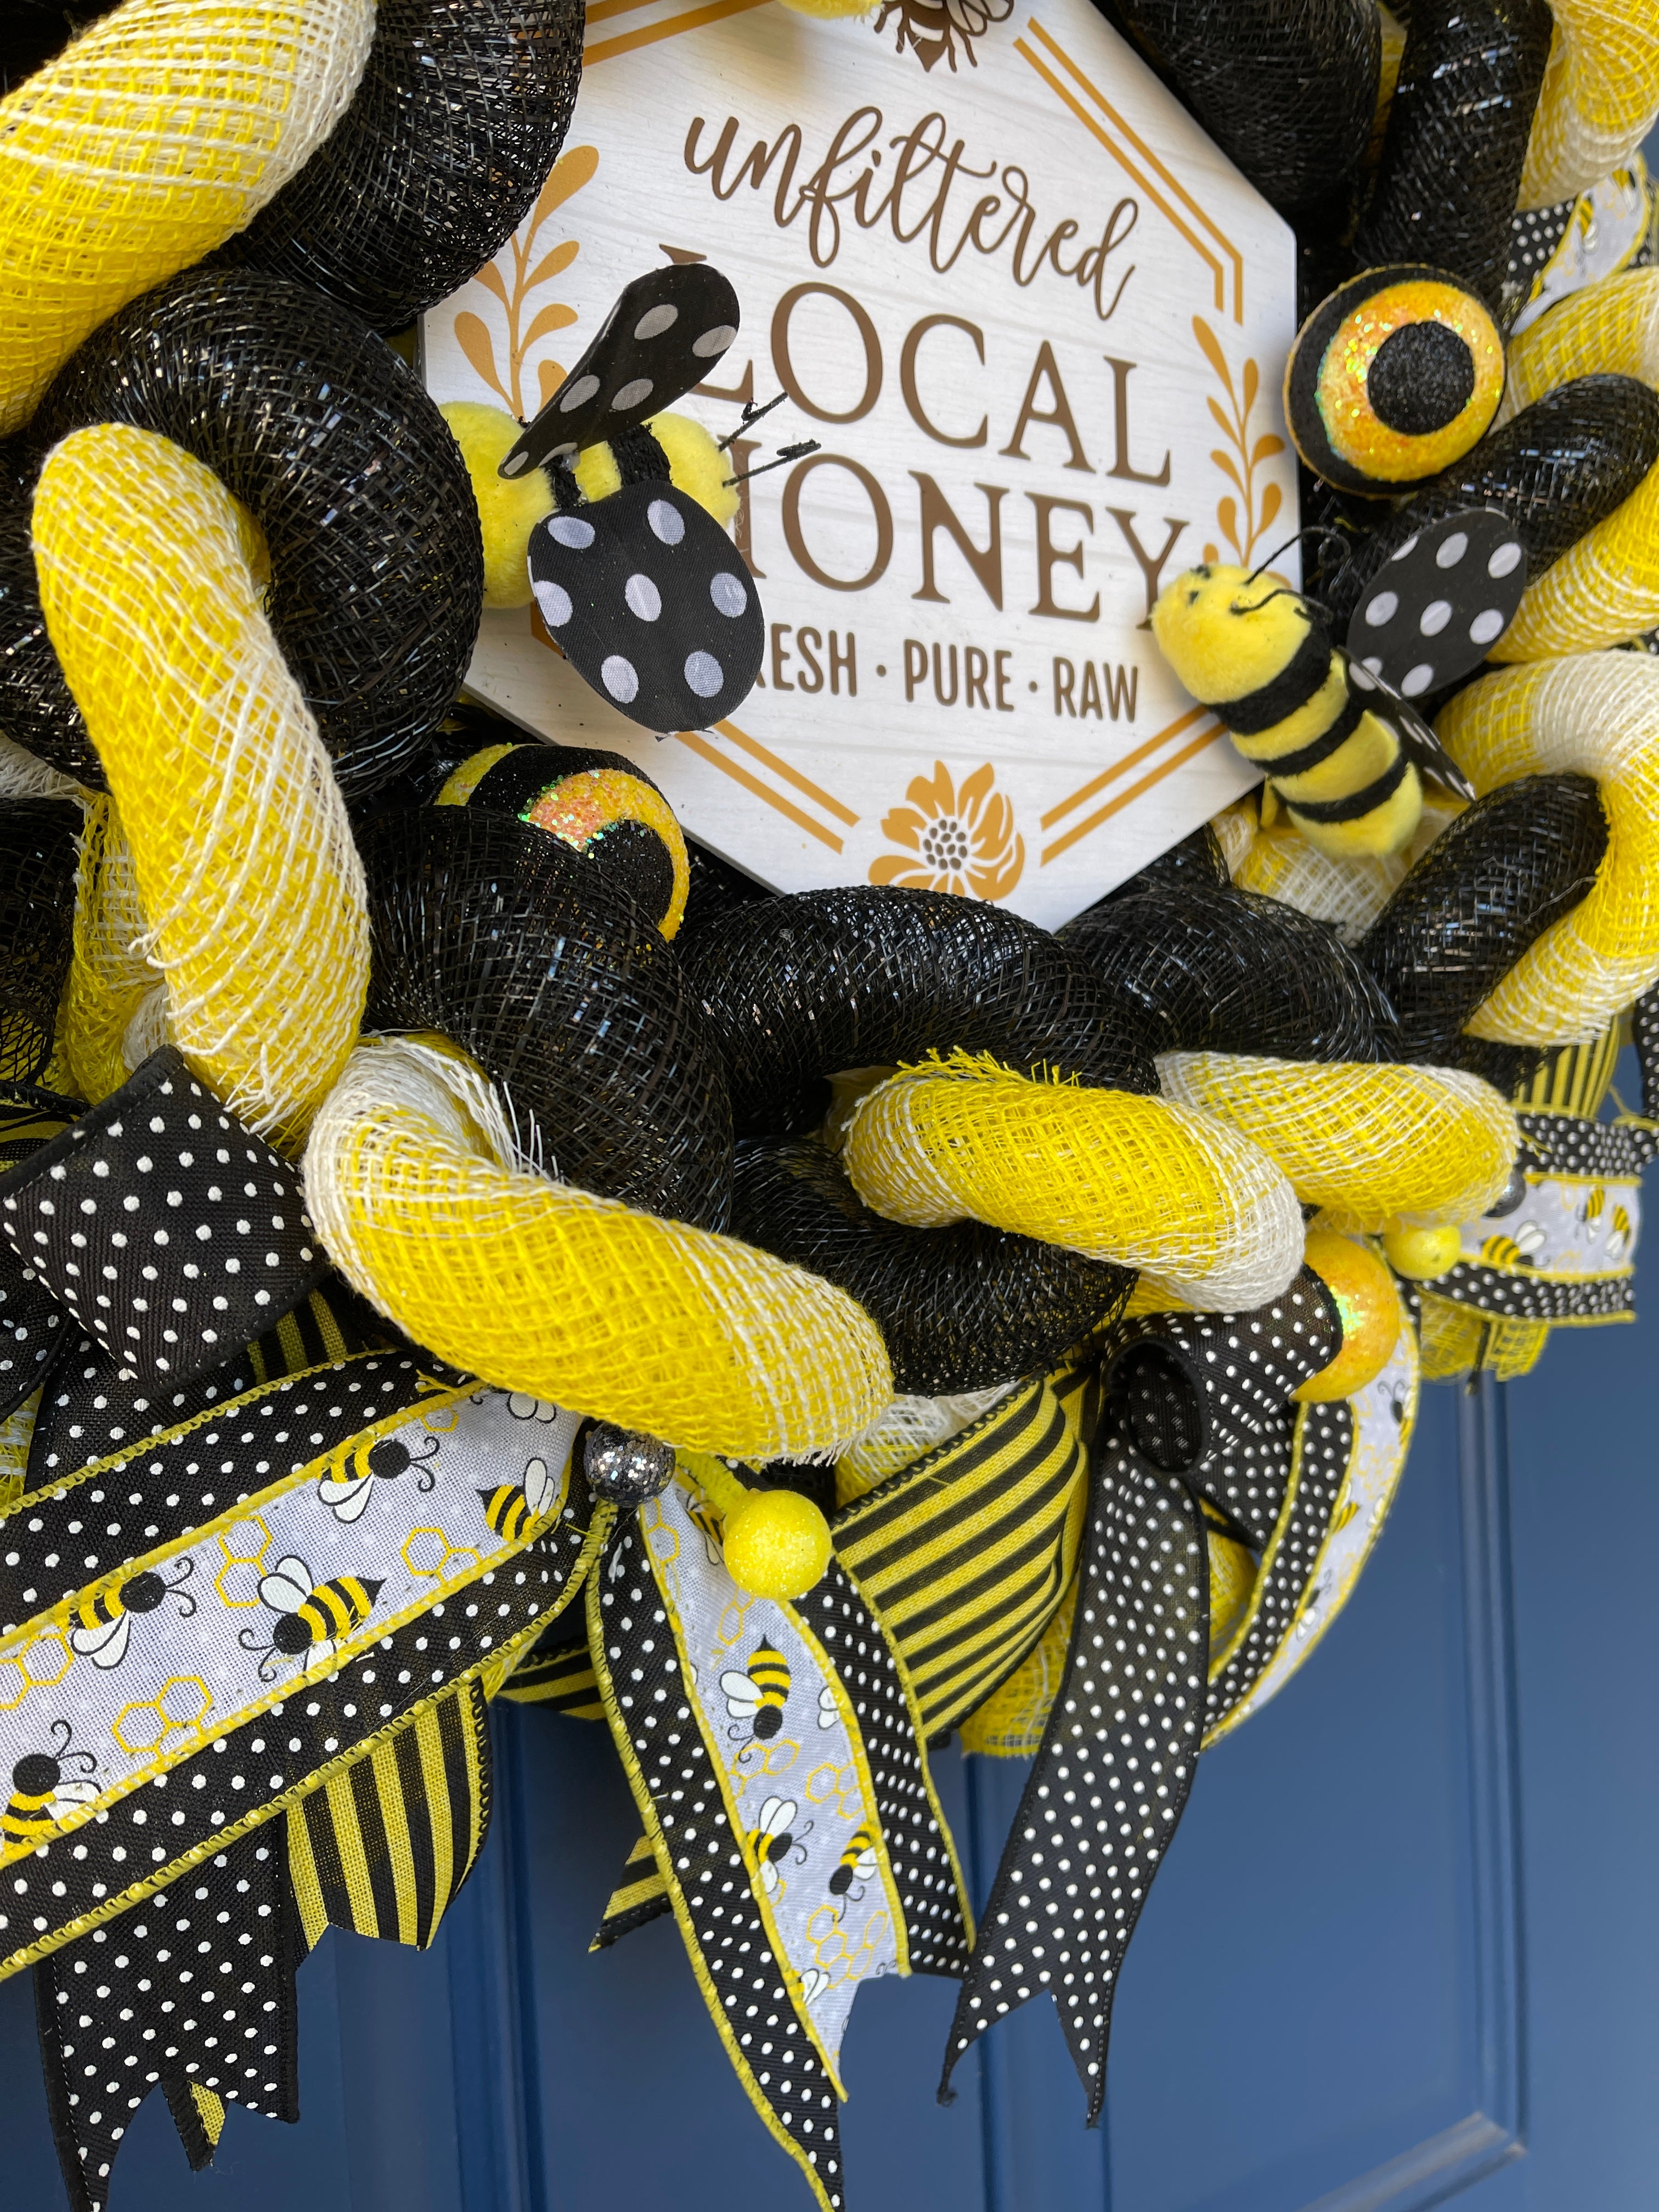 Bottom View of Deco Mesh Woven Tubes of Bumble Bee Local Honey Black and White Wreath for Front Door